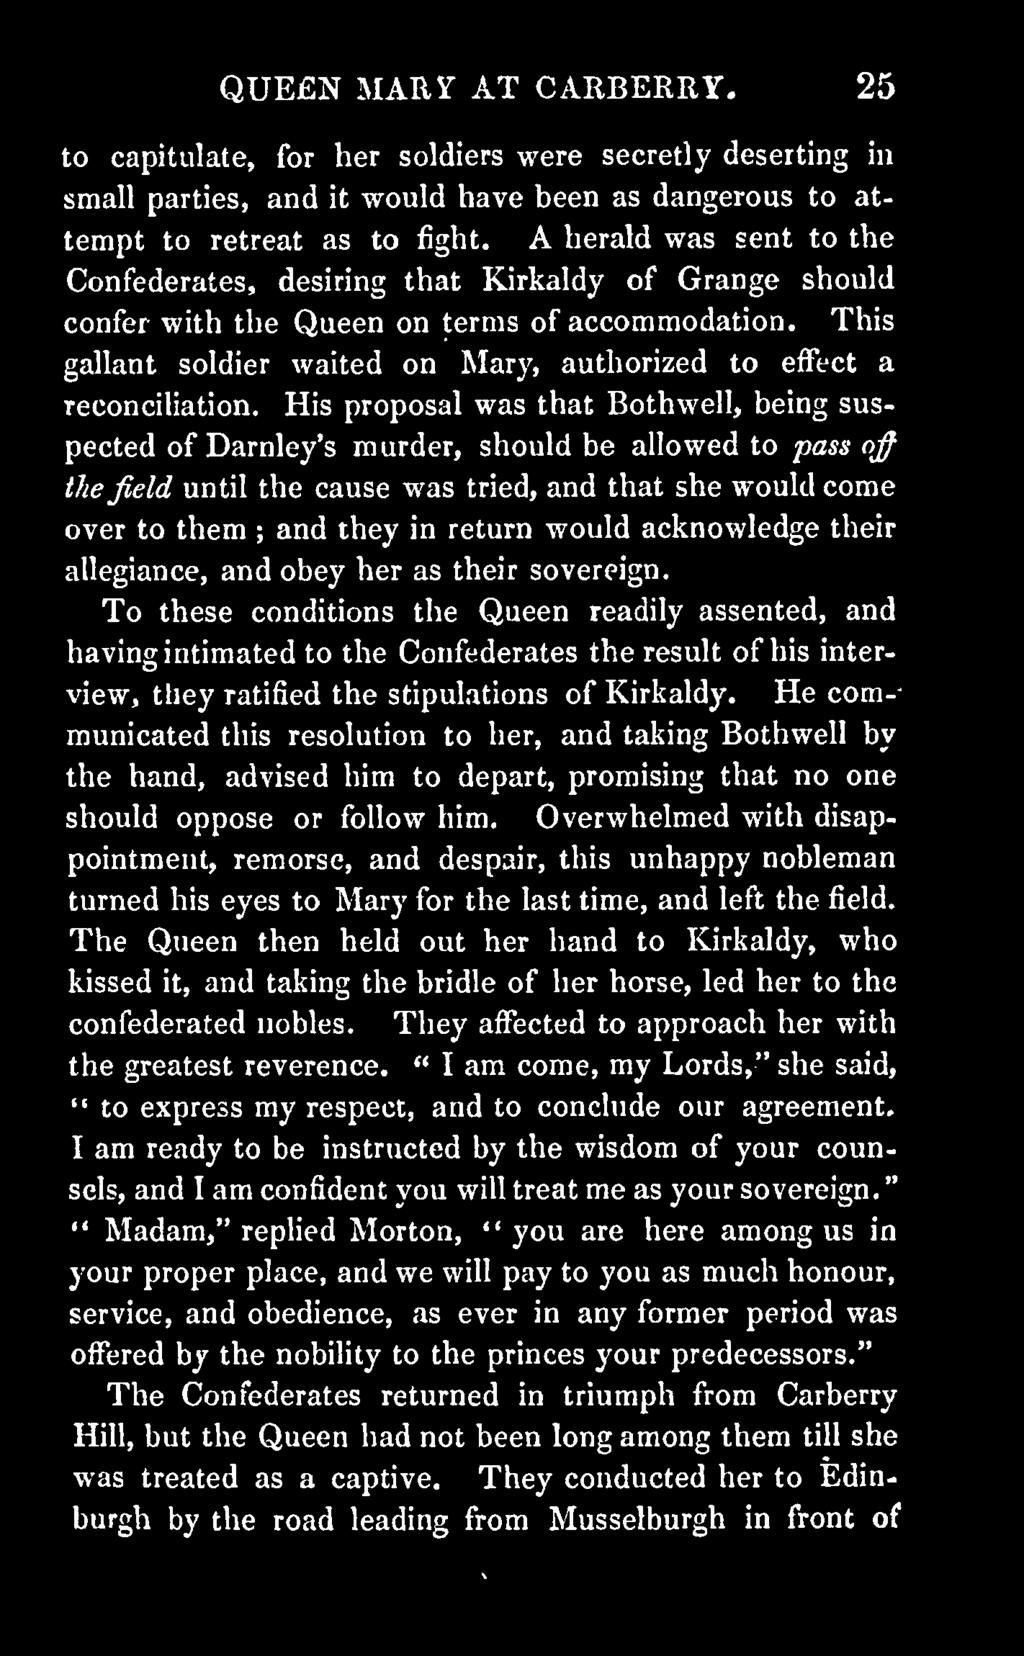 This gallant soldier waited on Mary, authorized to effect a reconciliation.